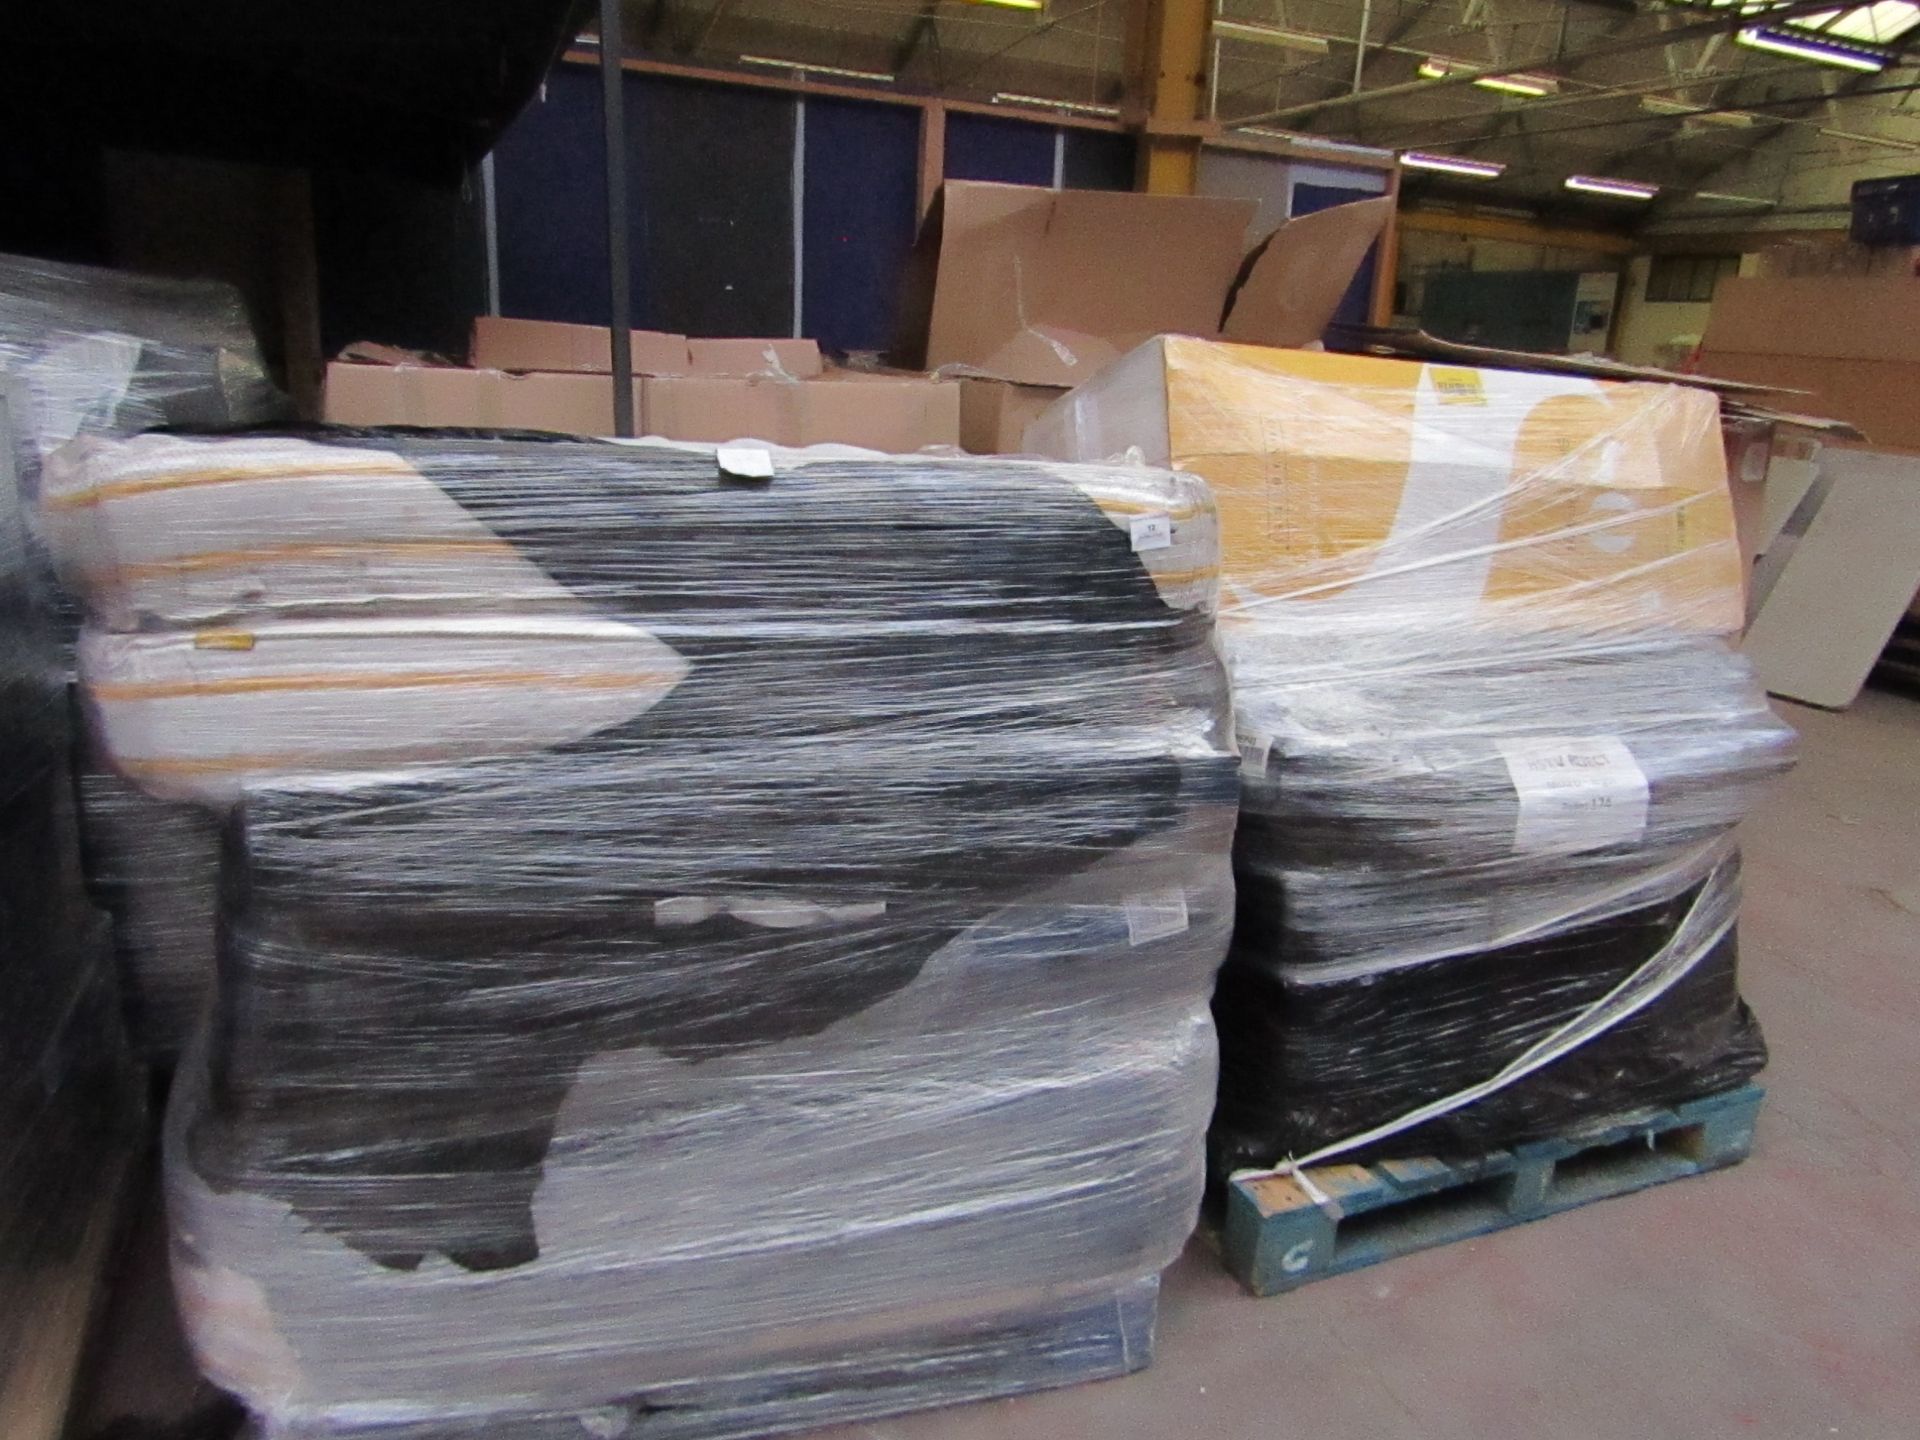 | 2X | PALLETS CONTAINING A TOTAL OF APPROX 6 SLEEP ORIGIN CUSTOMER RETURN MATTRESSES, COULD BE IN